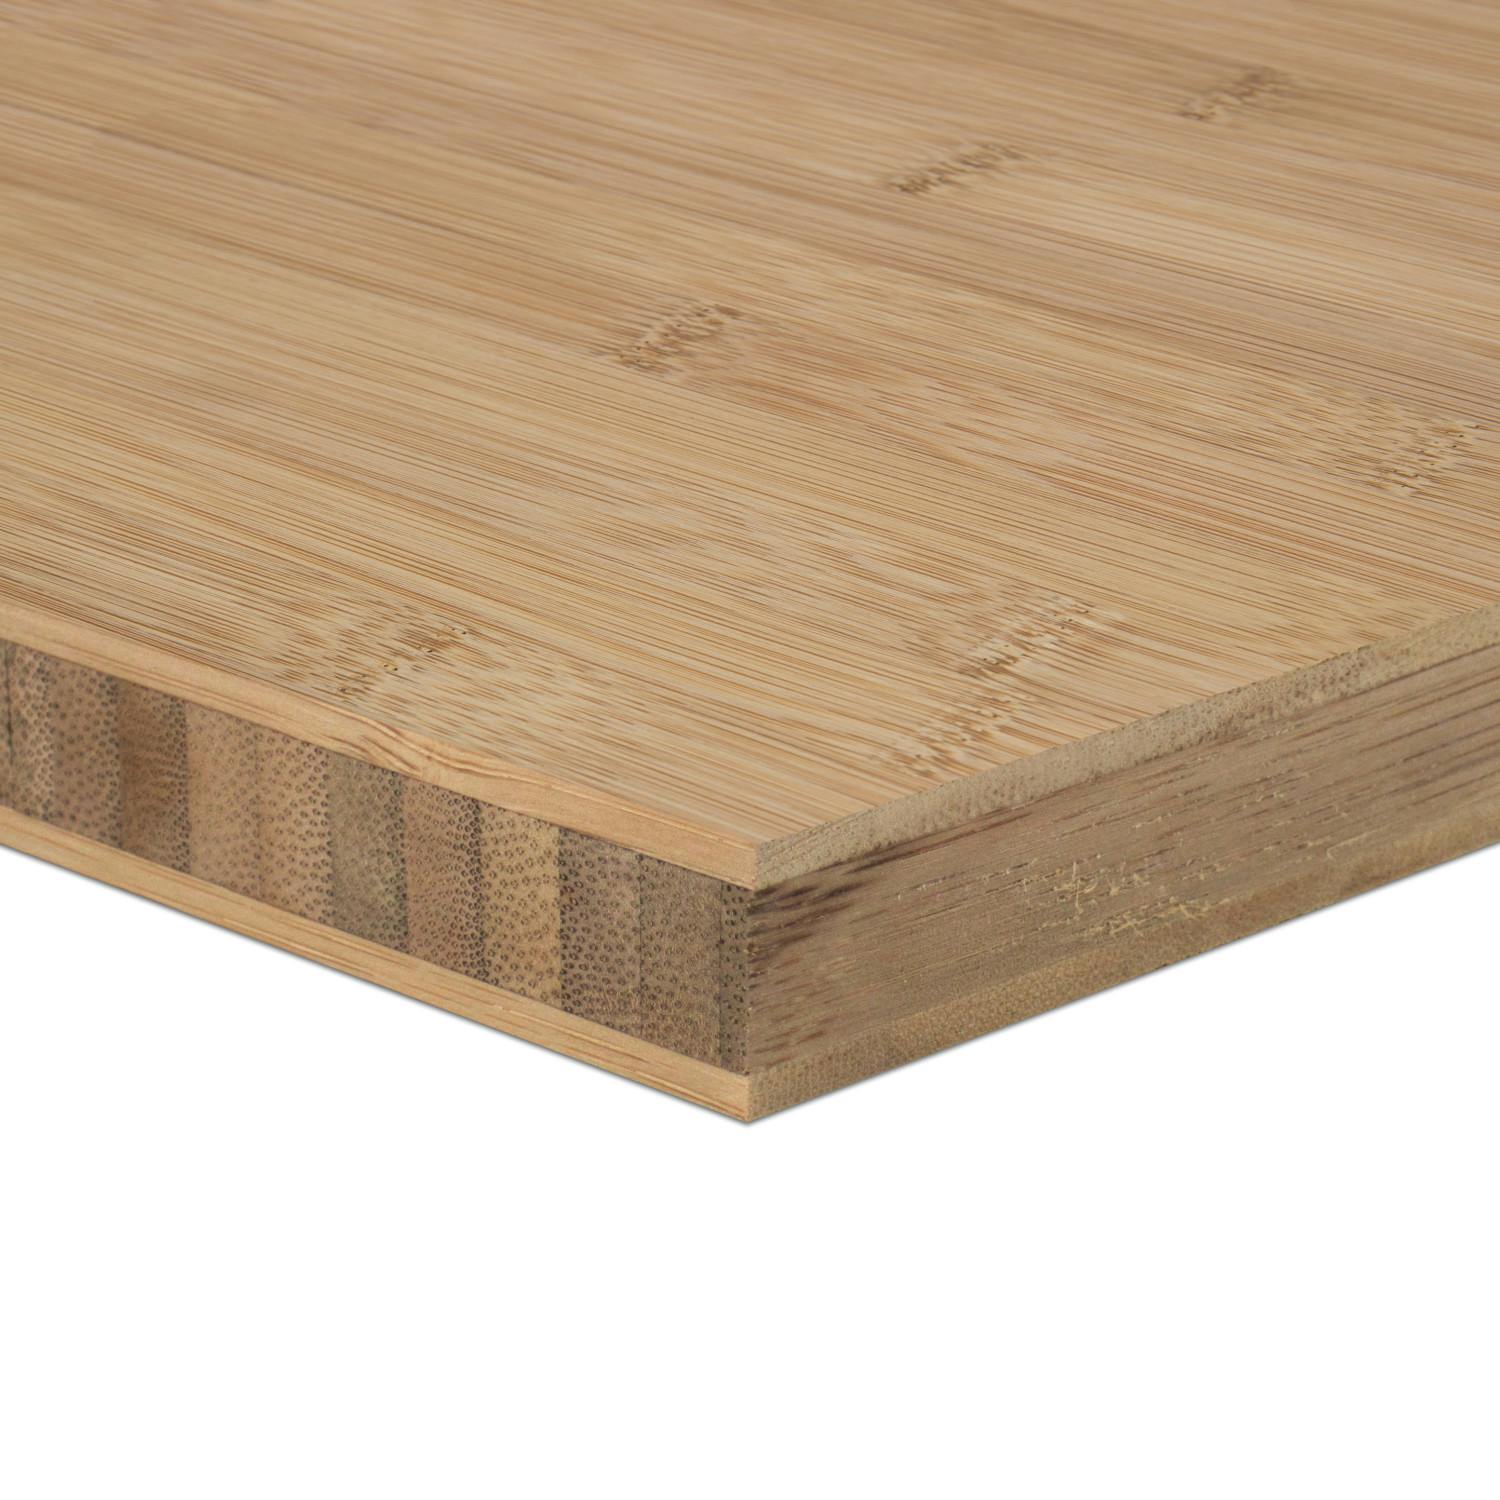 Bamboo Plywood - 3ply 3/4 in. Horizontal Carbonized